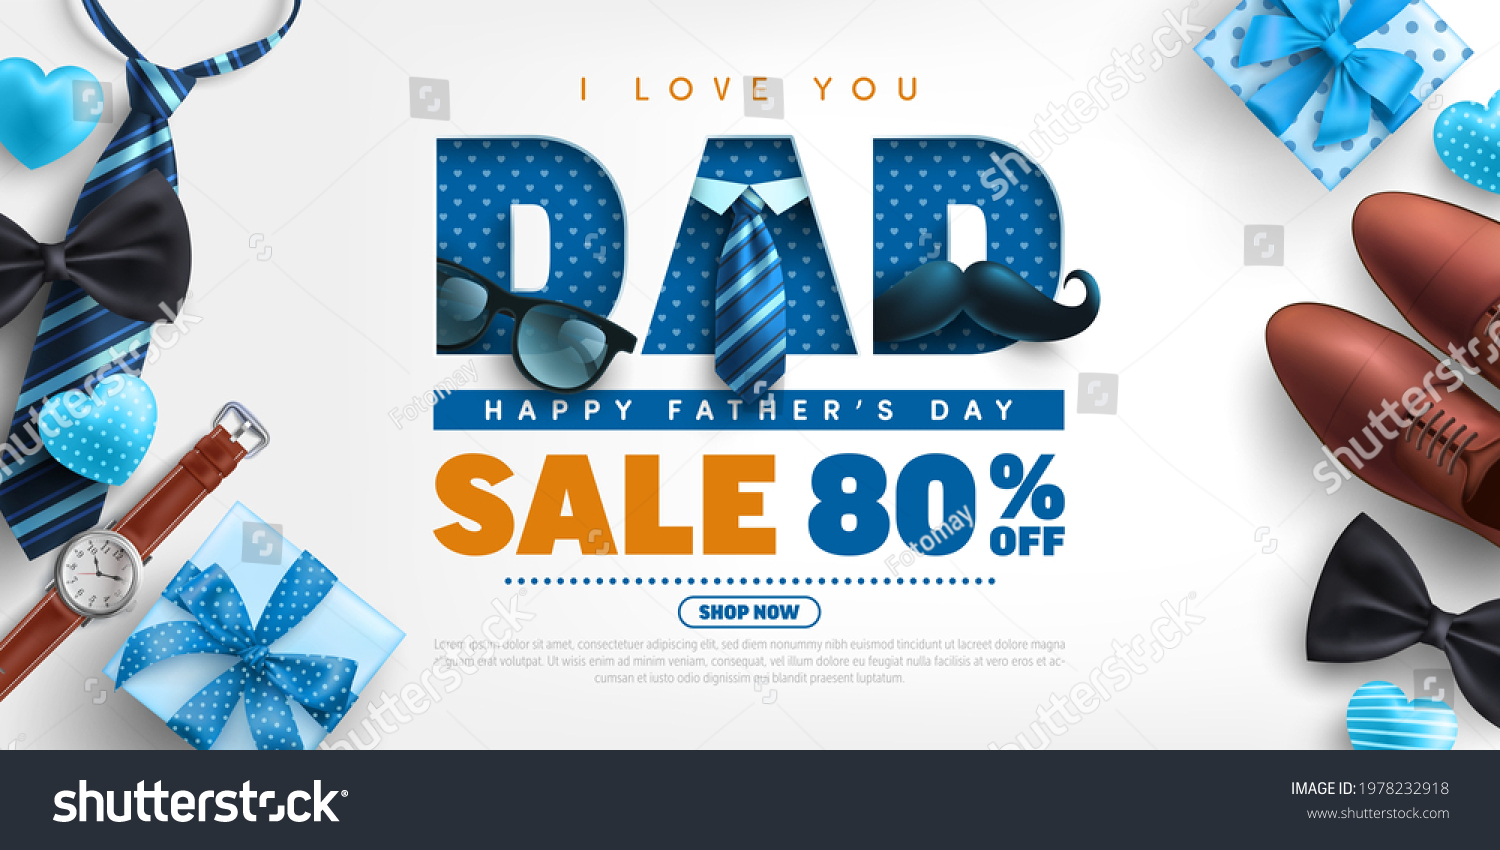 Father's Day Sale poster or banner template with necktie,glasses and gift box on blue.Greetings and presents for Father's Day in flat lay styling.Promotion and shopping template for love dad concept. #1978232918